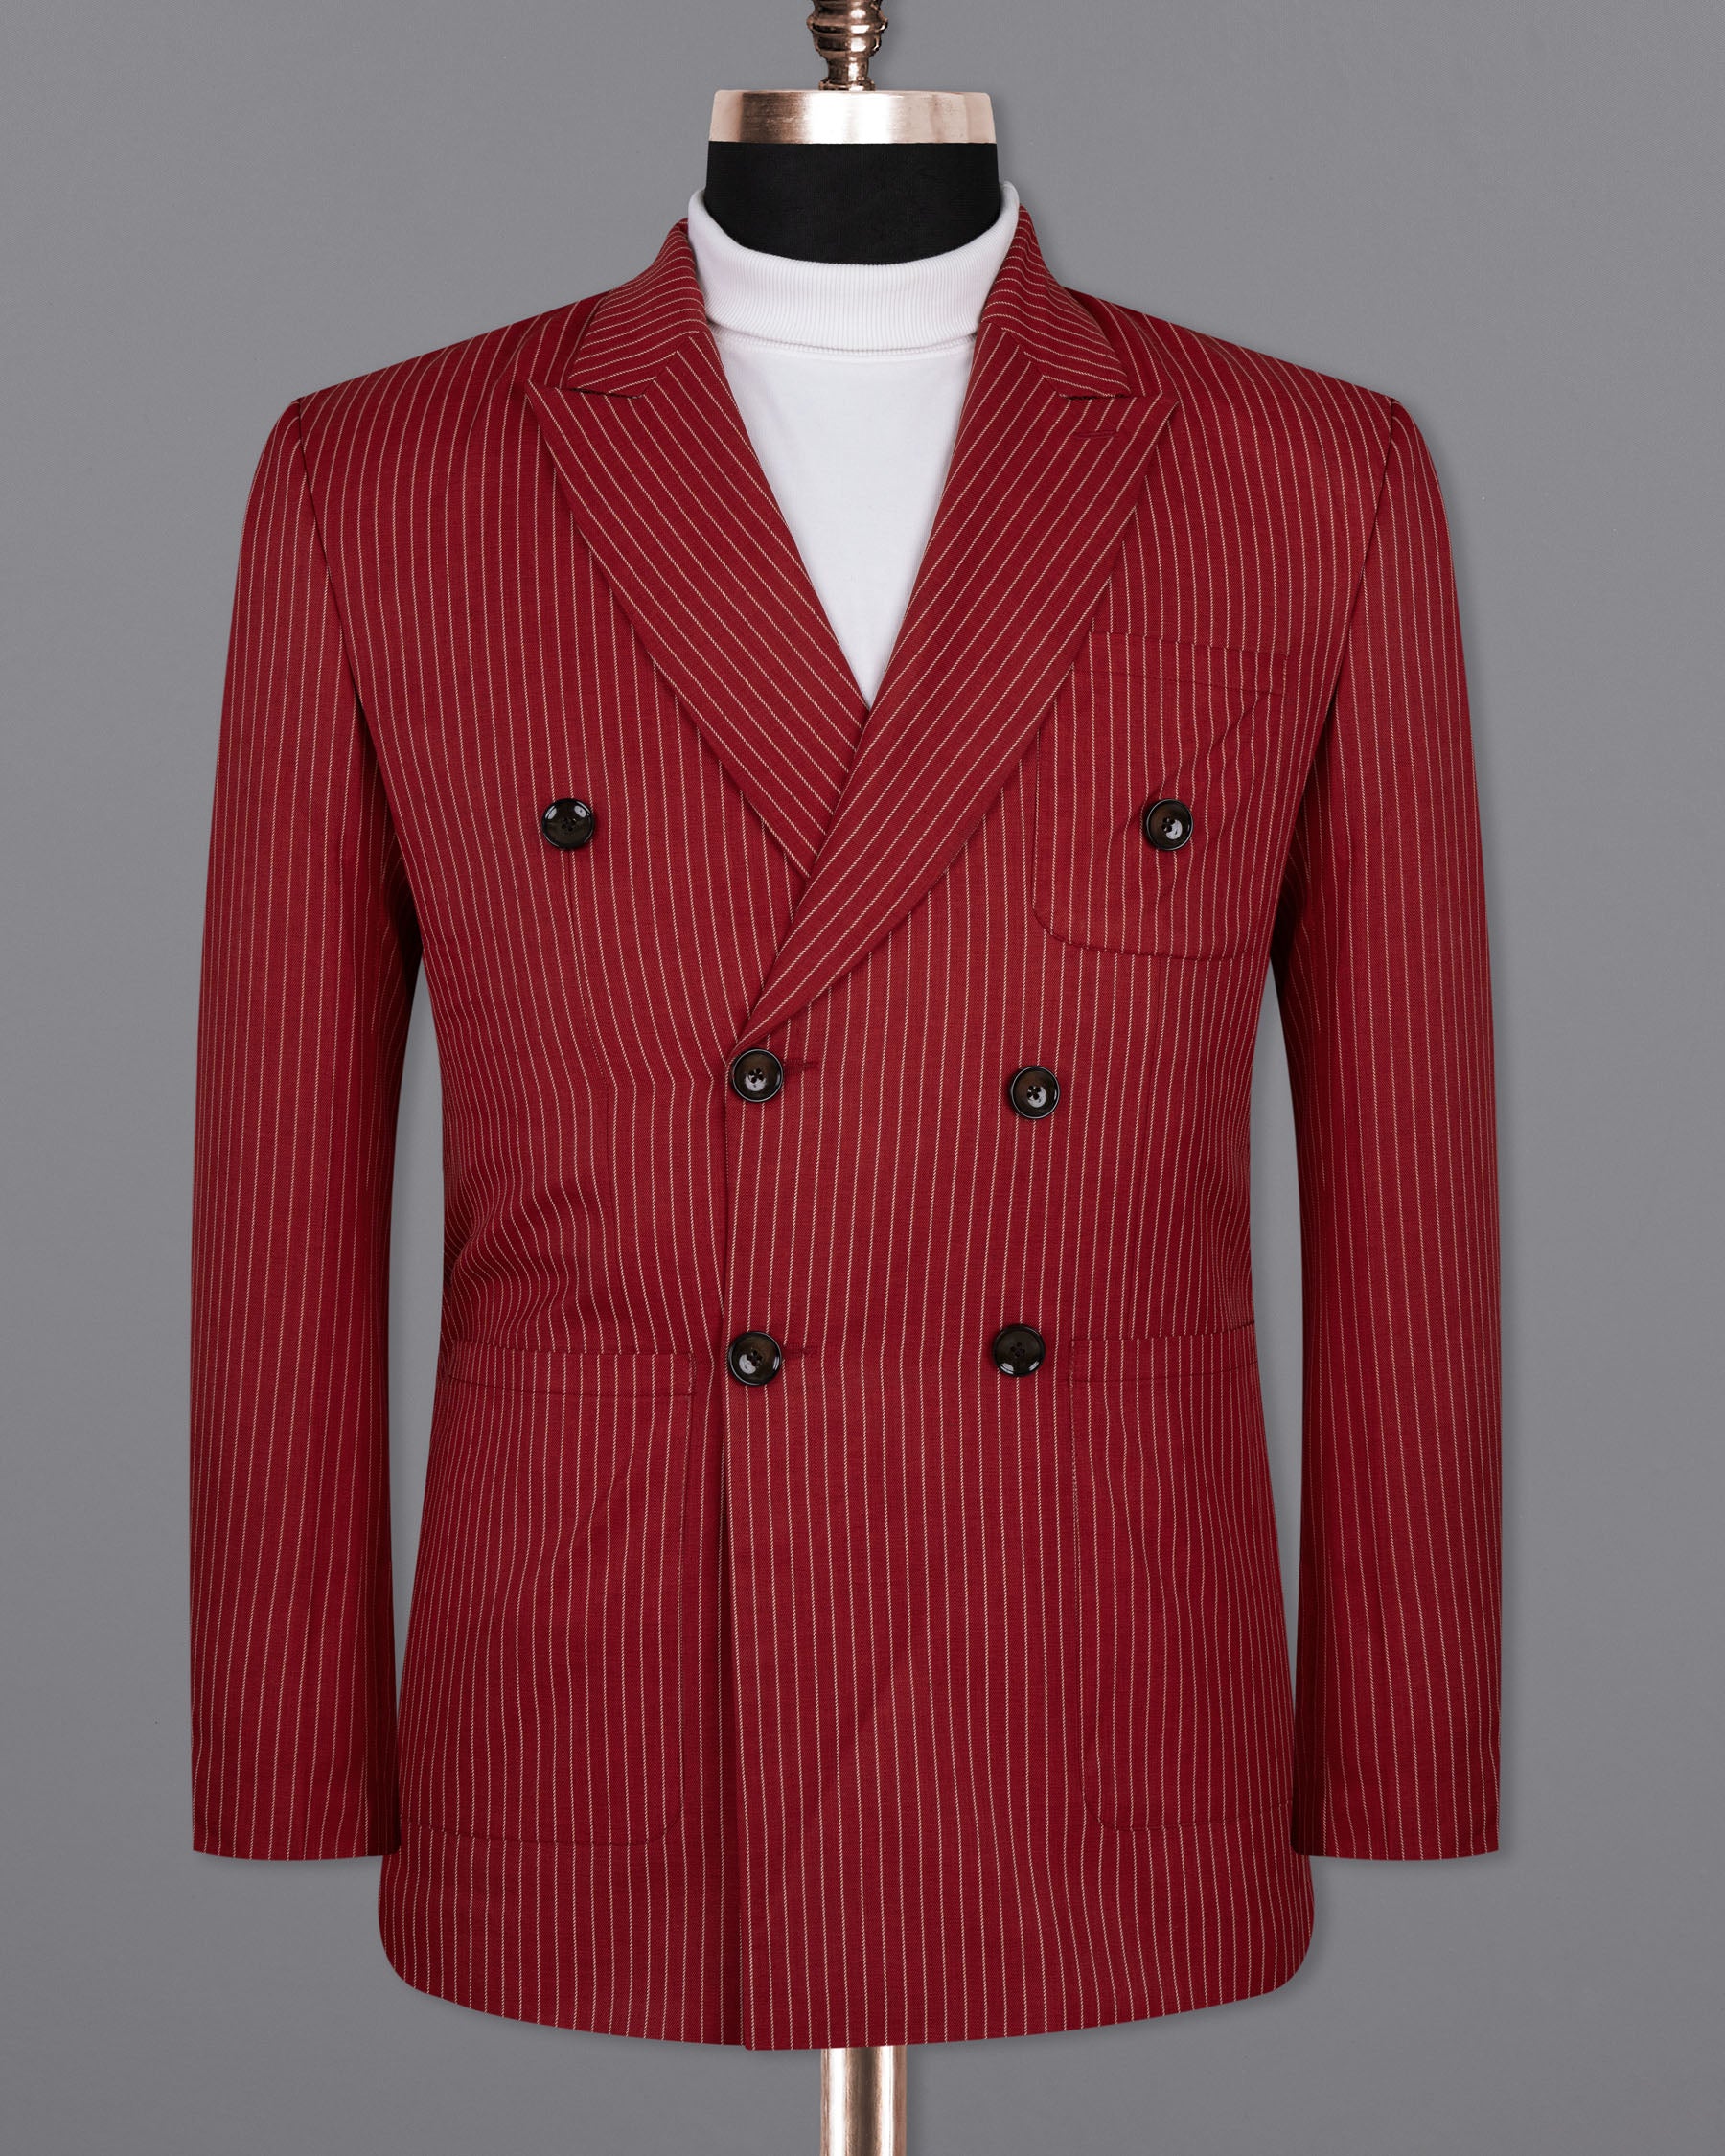 Merlot Red Striped Wool Rich Double-Breasted Sports Blazer